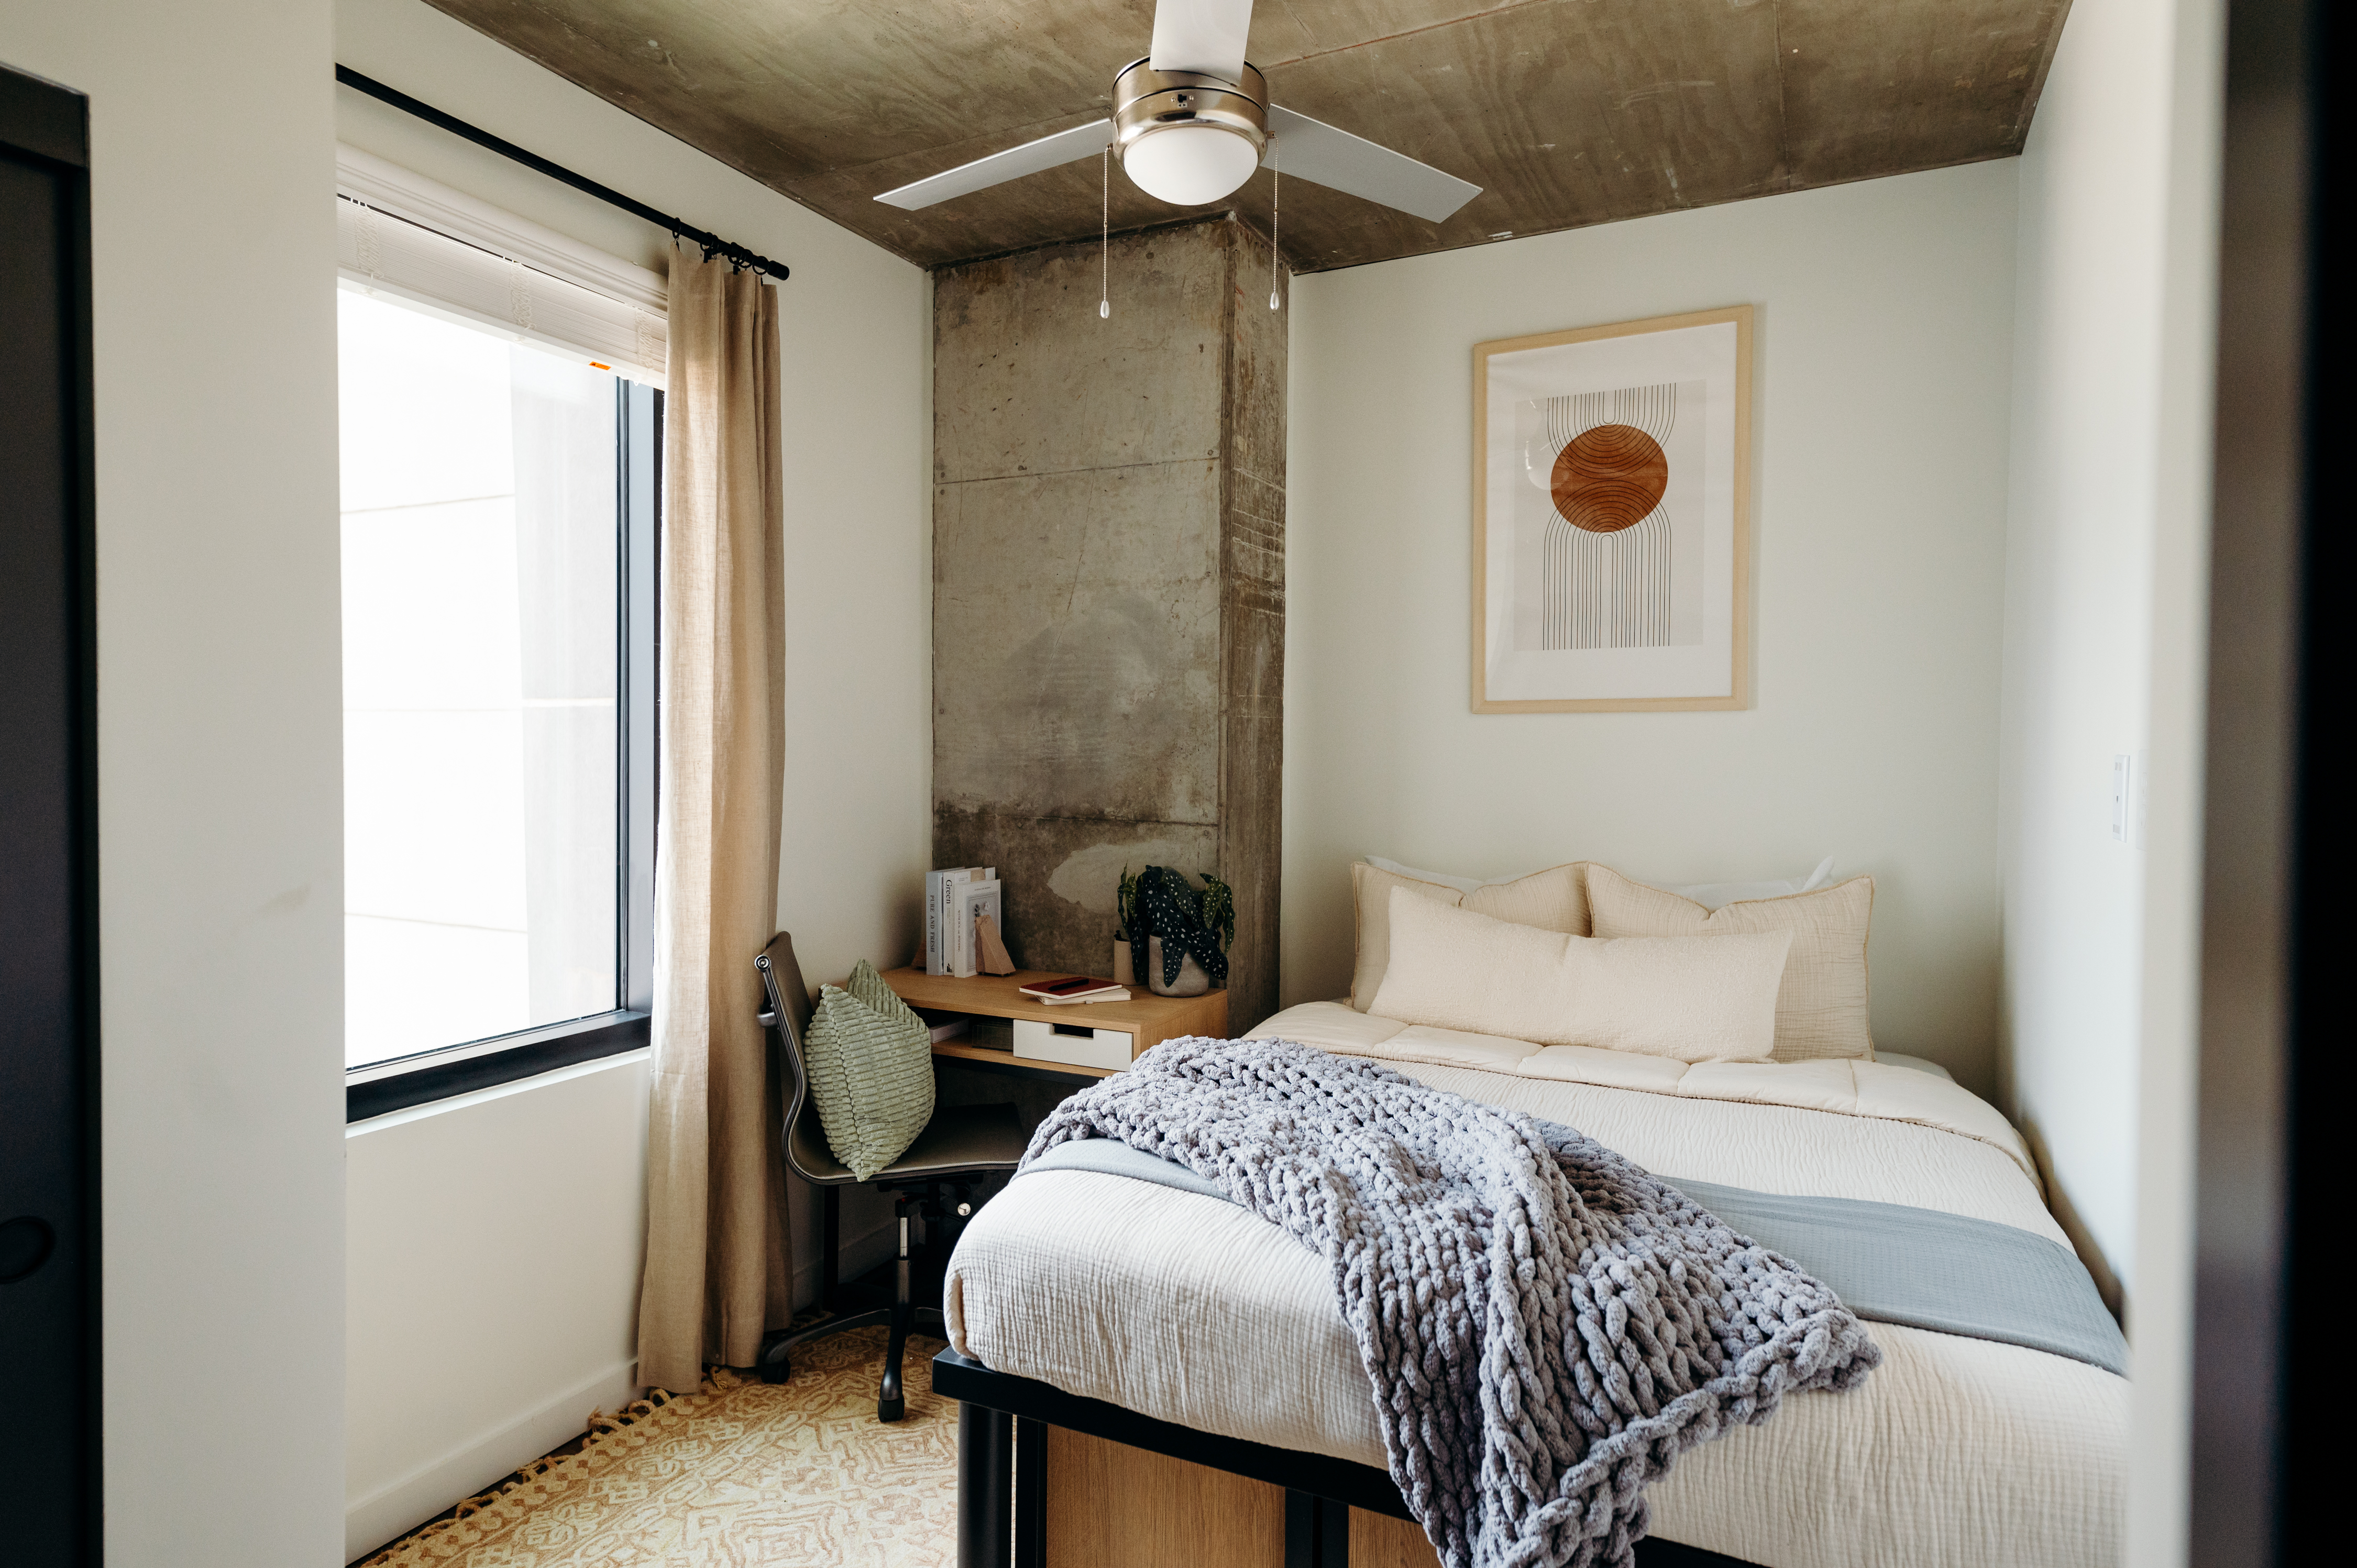 Image of the interior of a bedroom at Whistler, a midtown student housing apartment in Atlanta.